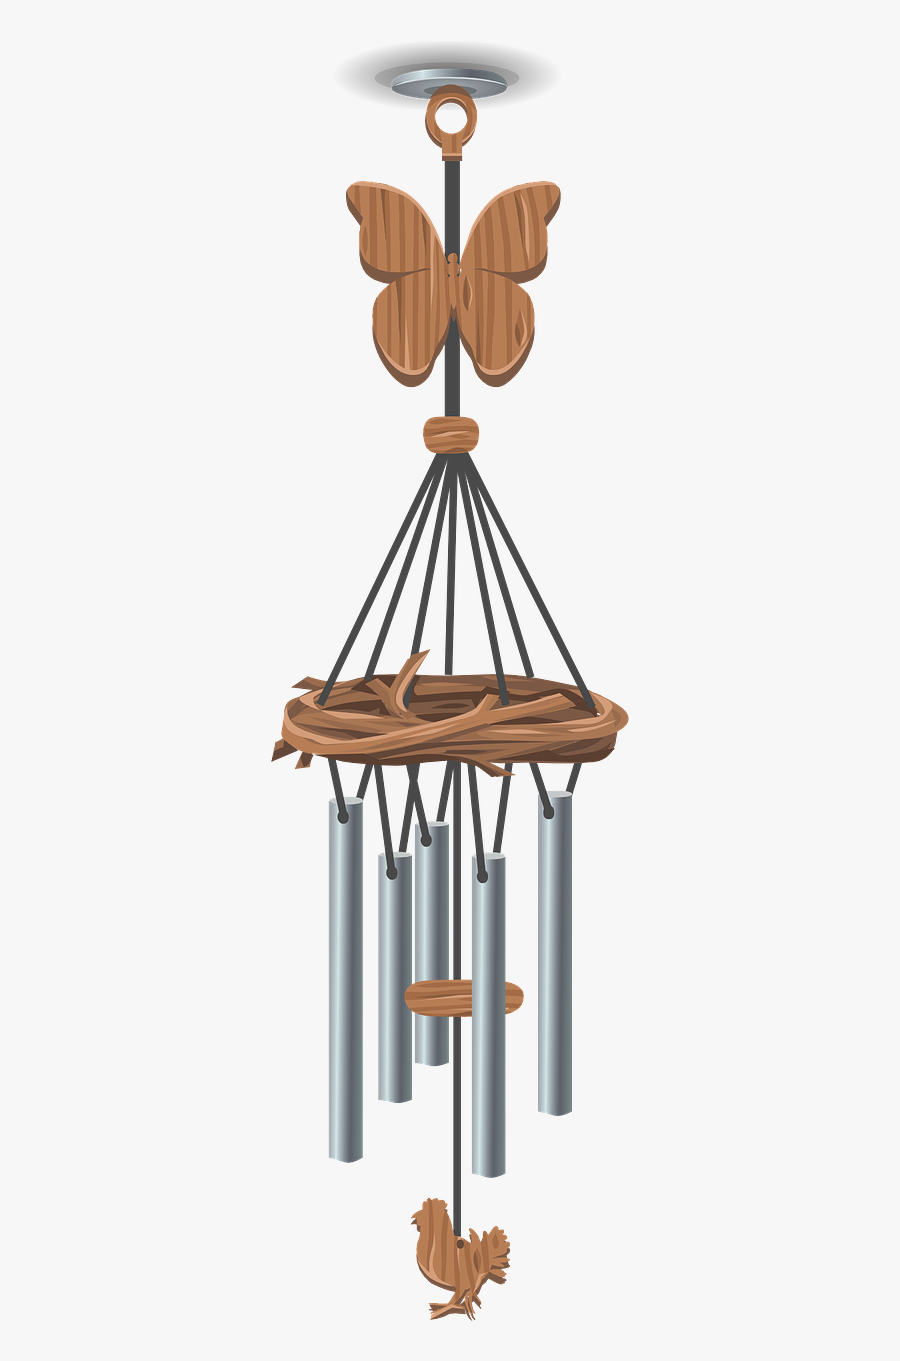 Wind Chimes Clipart Png, Transparent Clipart